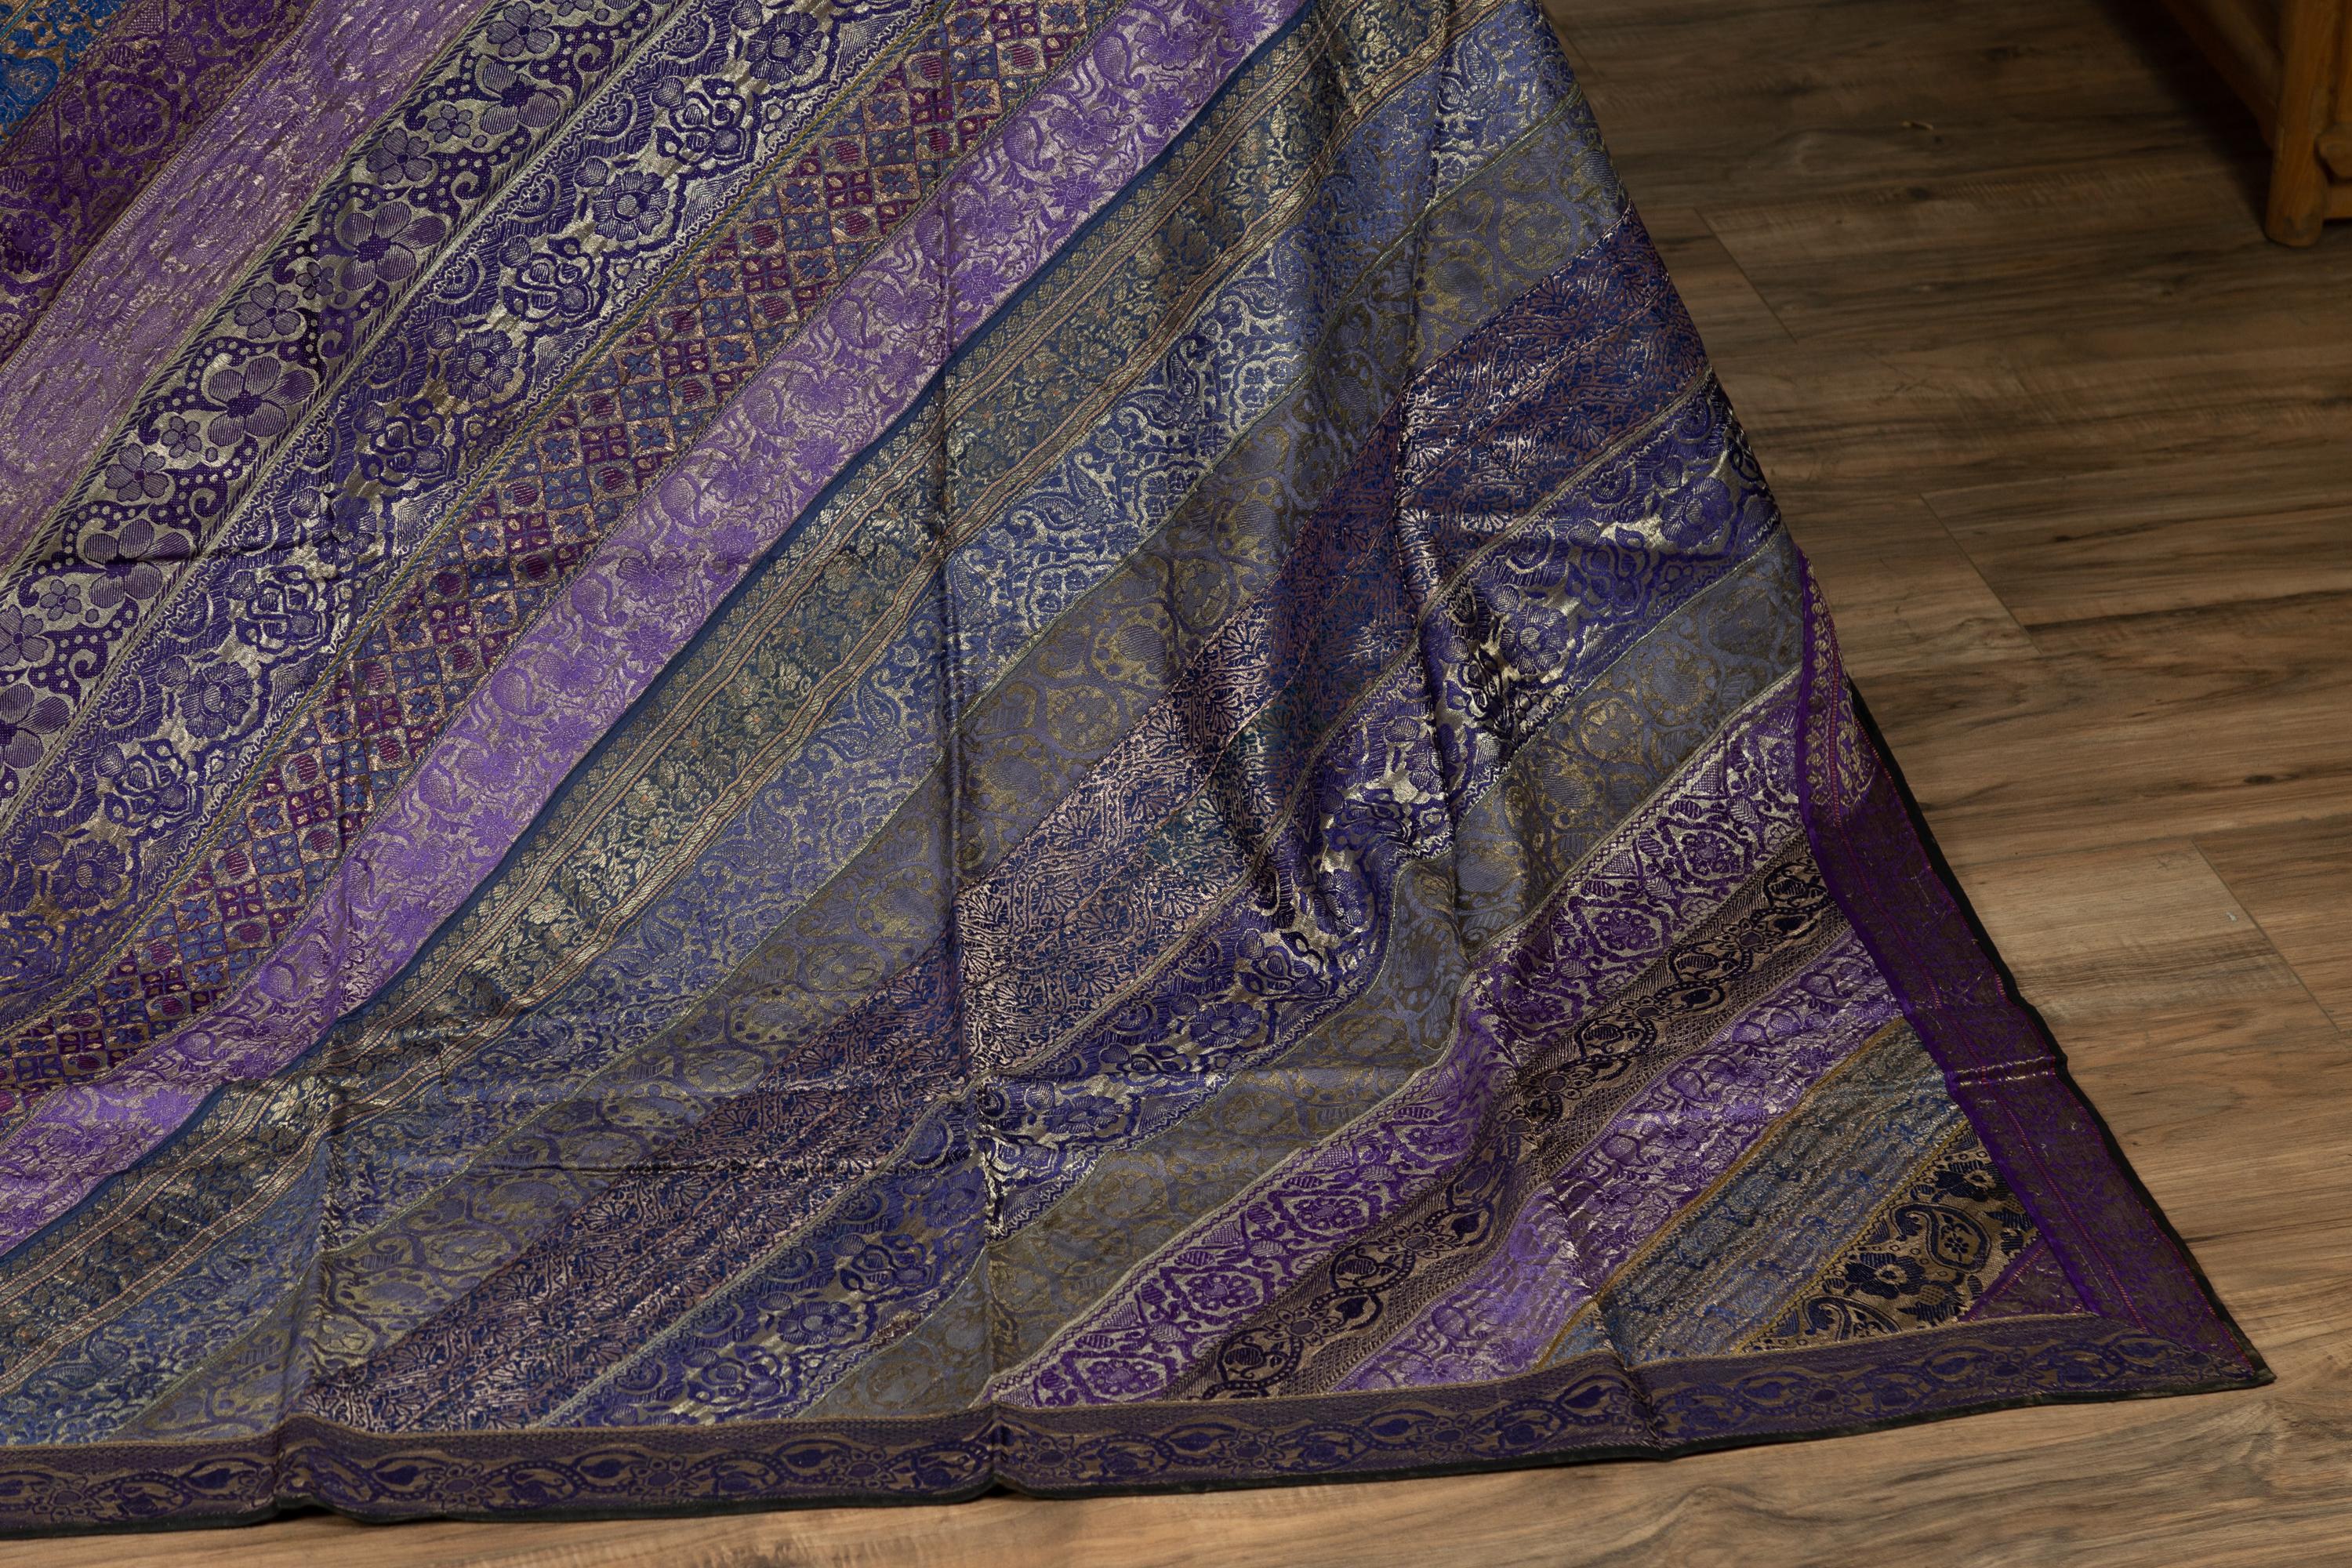 Vintage Indian Silk Embroidered Fabric with Purple, Silver and Gold Tones 2